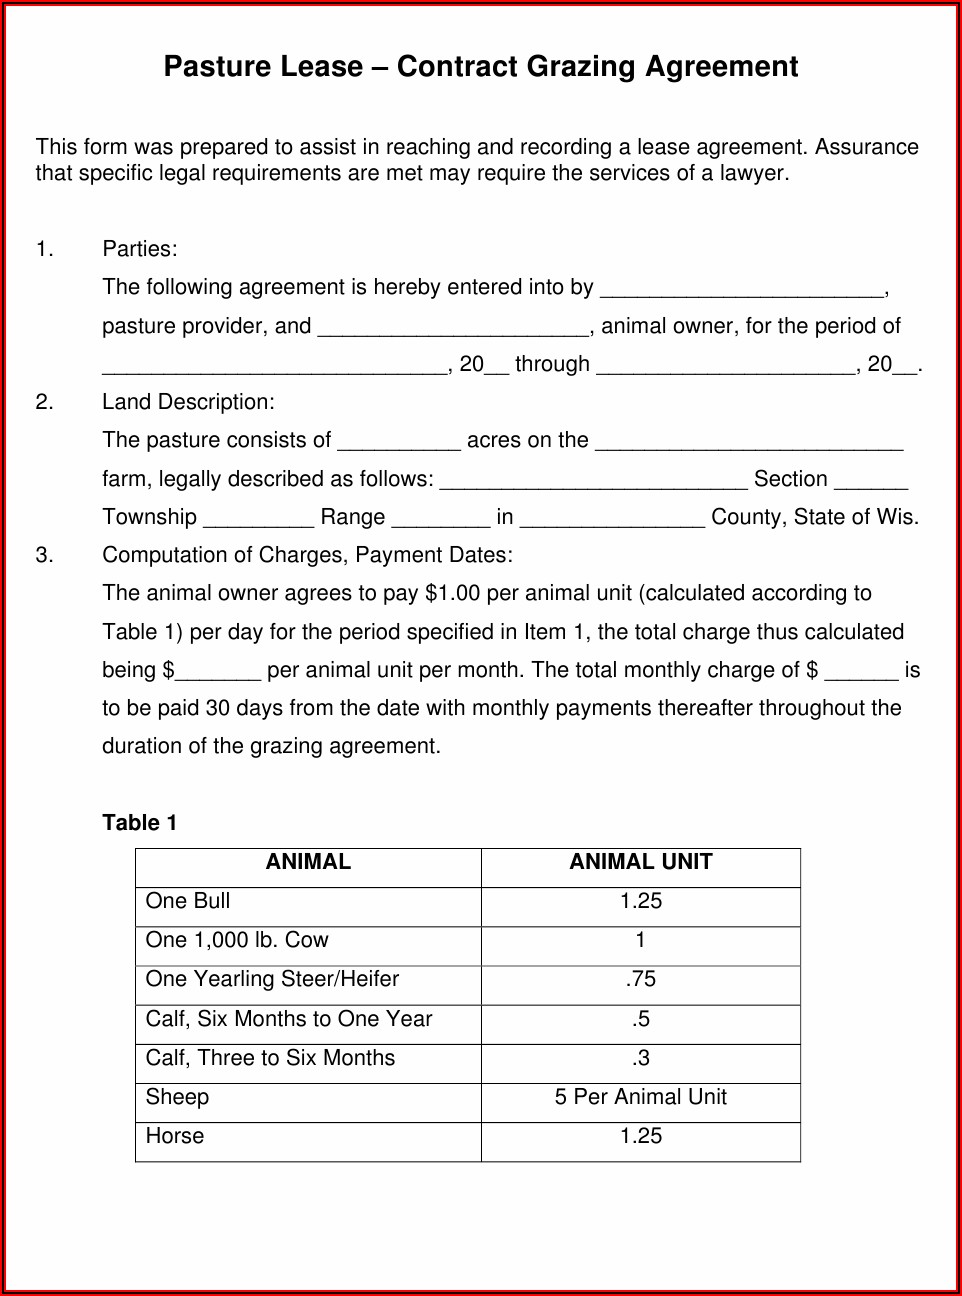 Pasture Grazing Lease Agreement Template